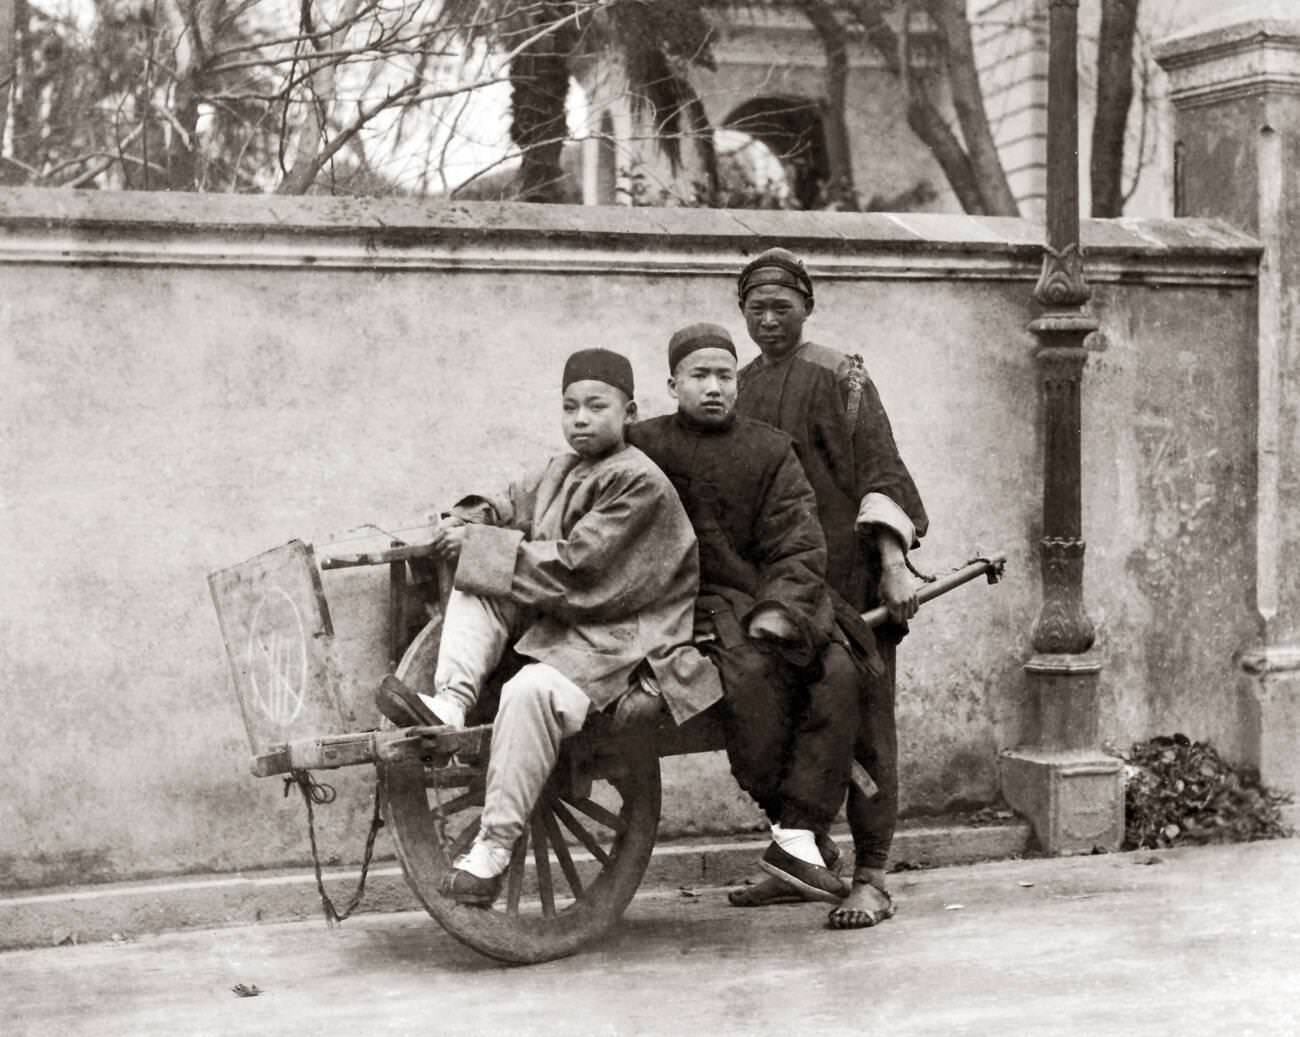 Rare Historic Photos of China in the 1860s that Reveal the Landscape, Architecture, and People of a Distant Time